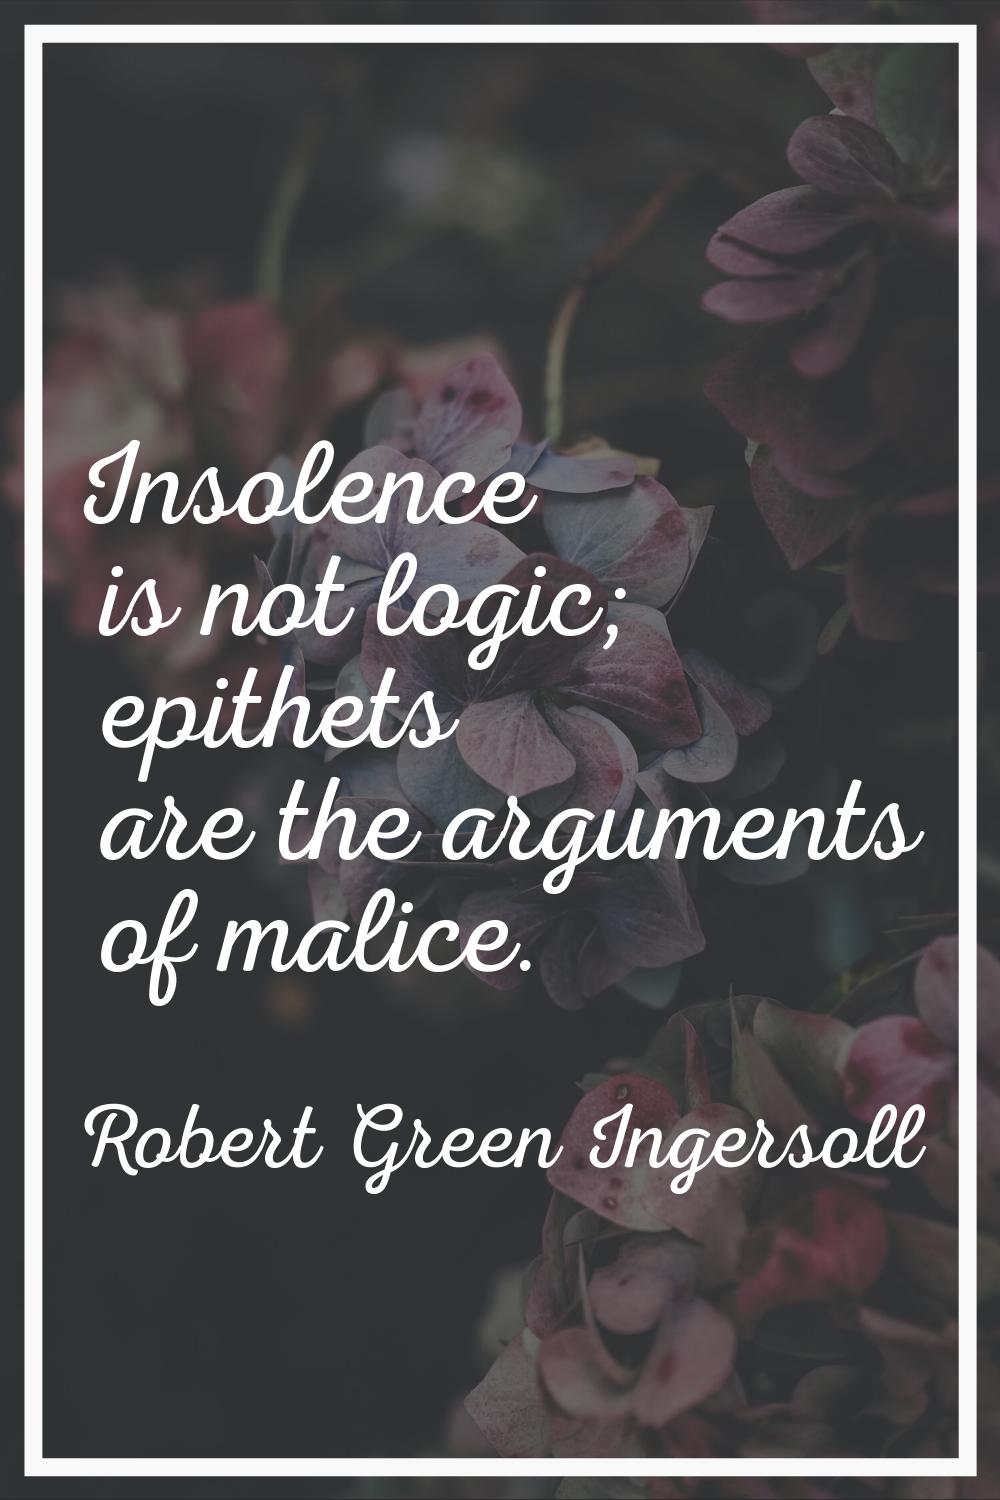 Insolence is not logic; epithets are the arguments of malice.